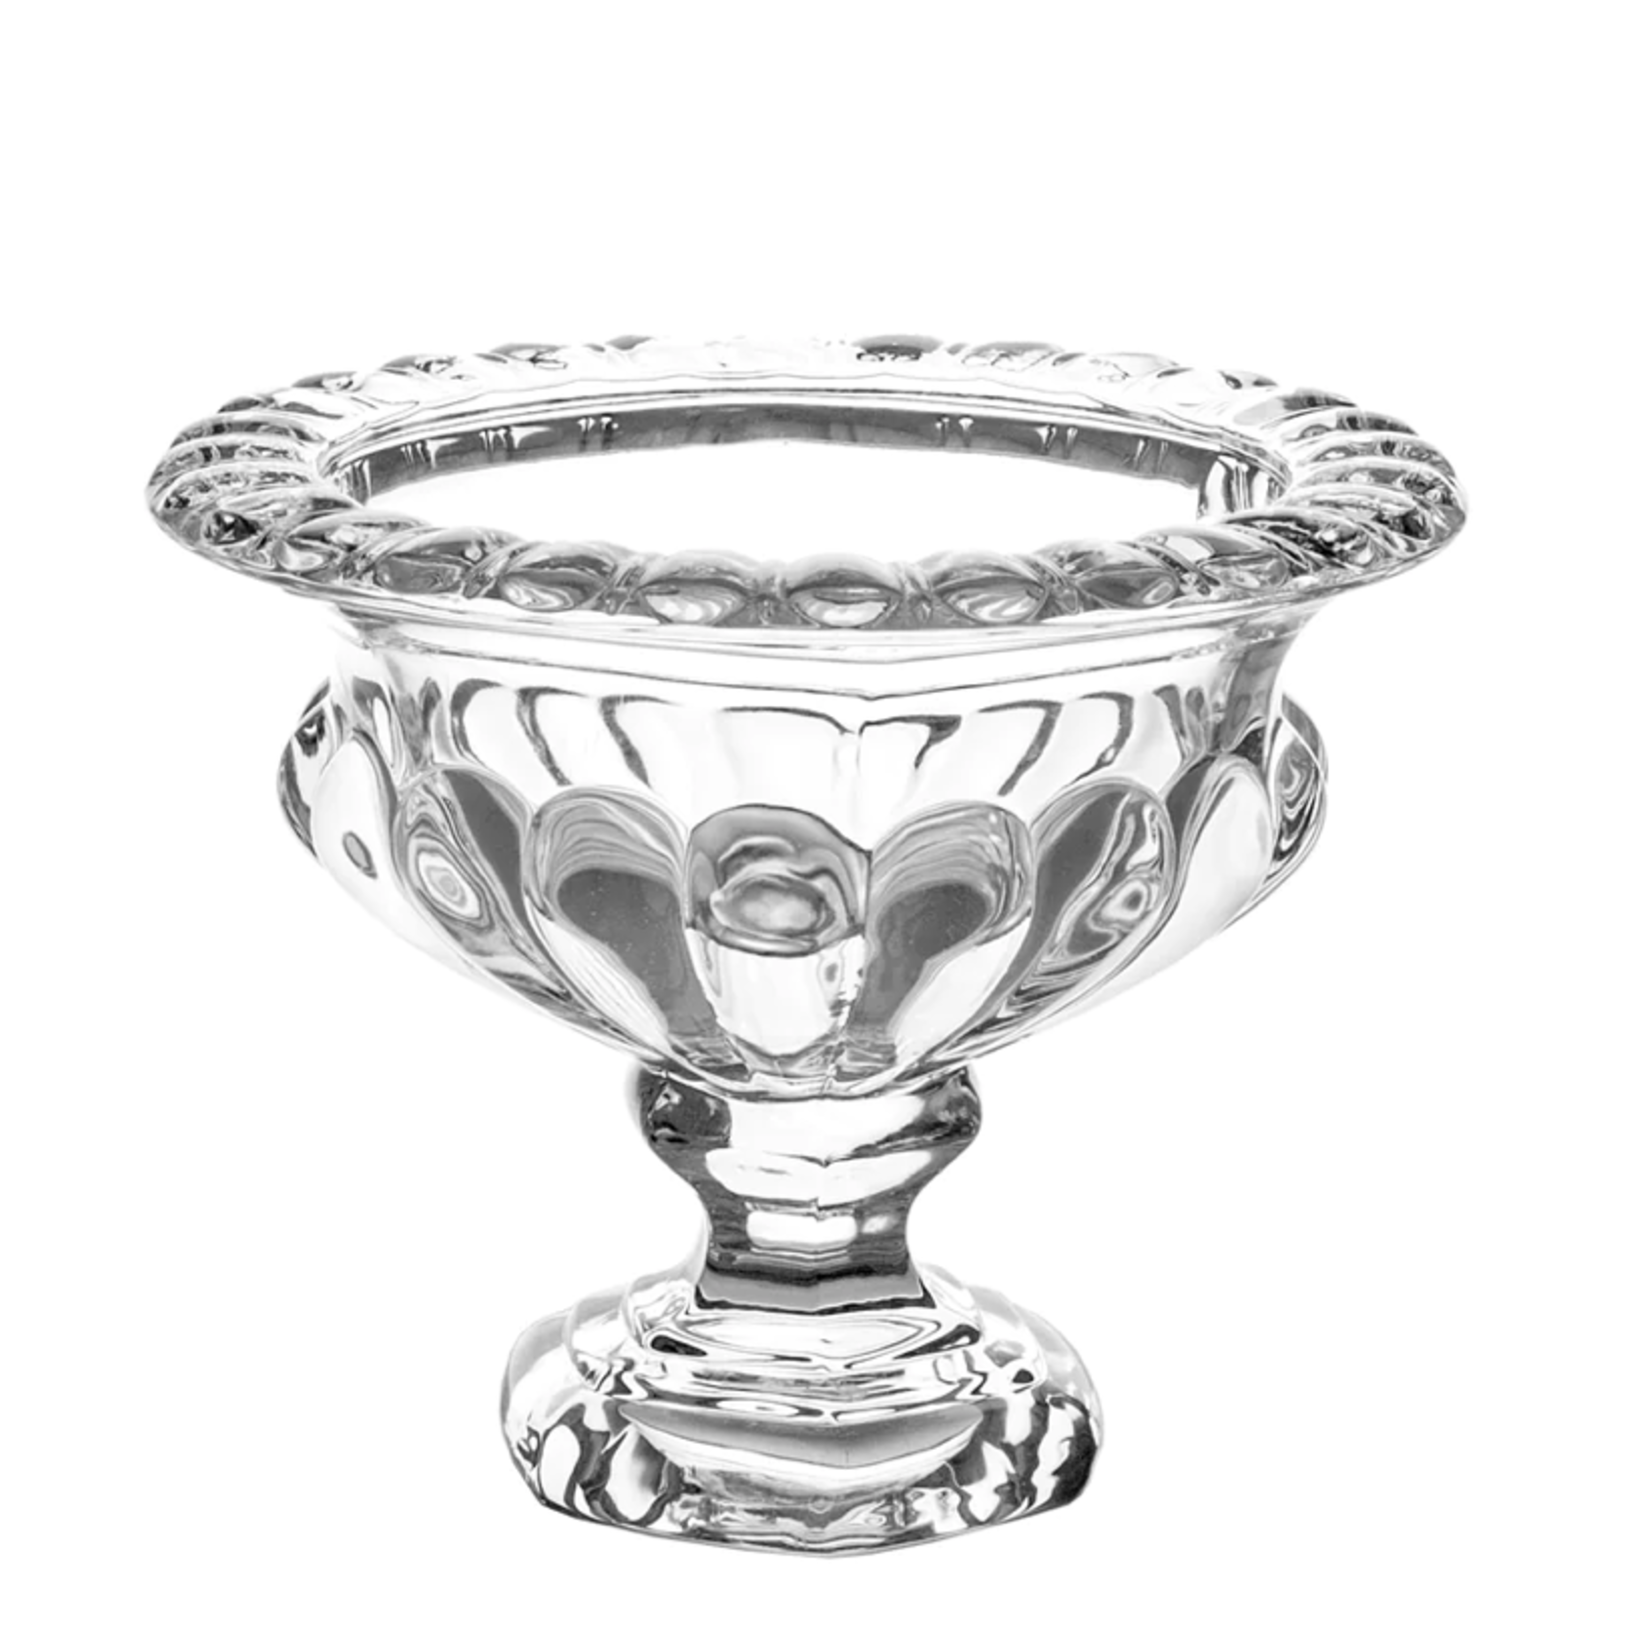 8.5”H X 10”THICK GLASS COMPOTE